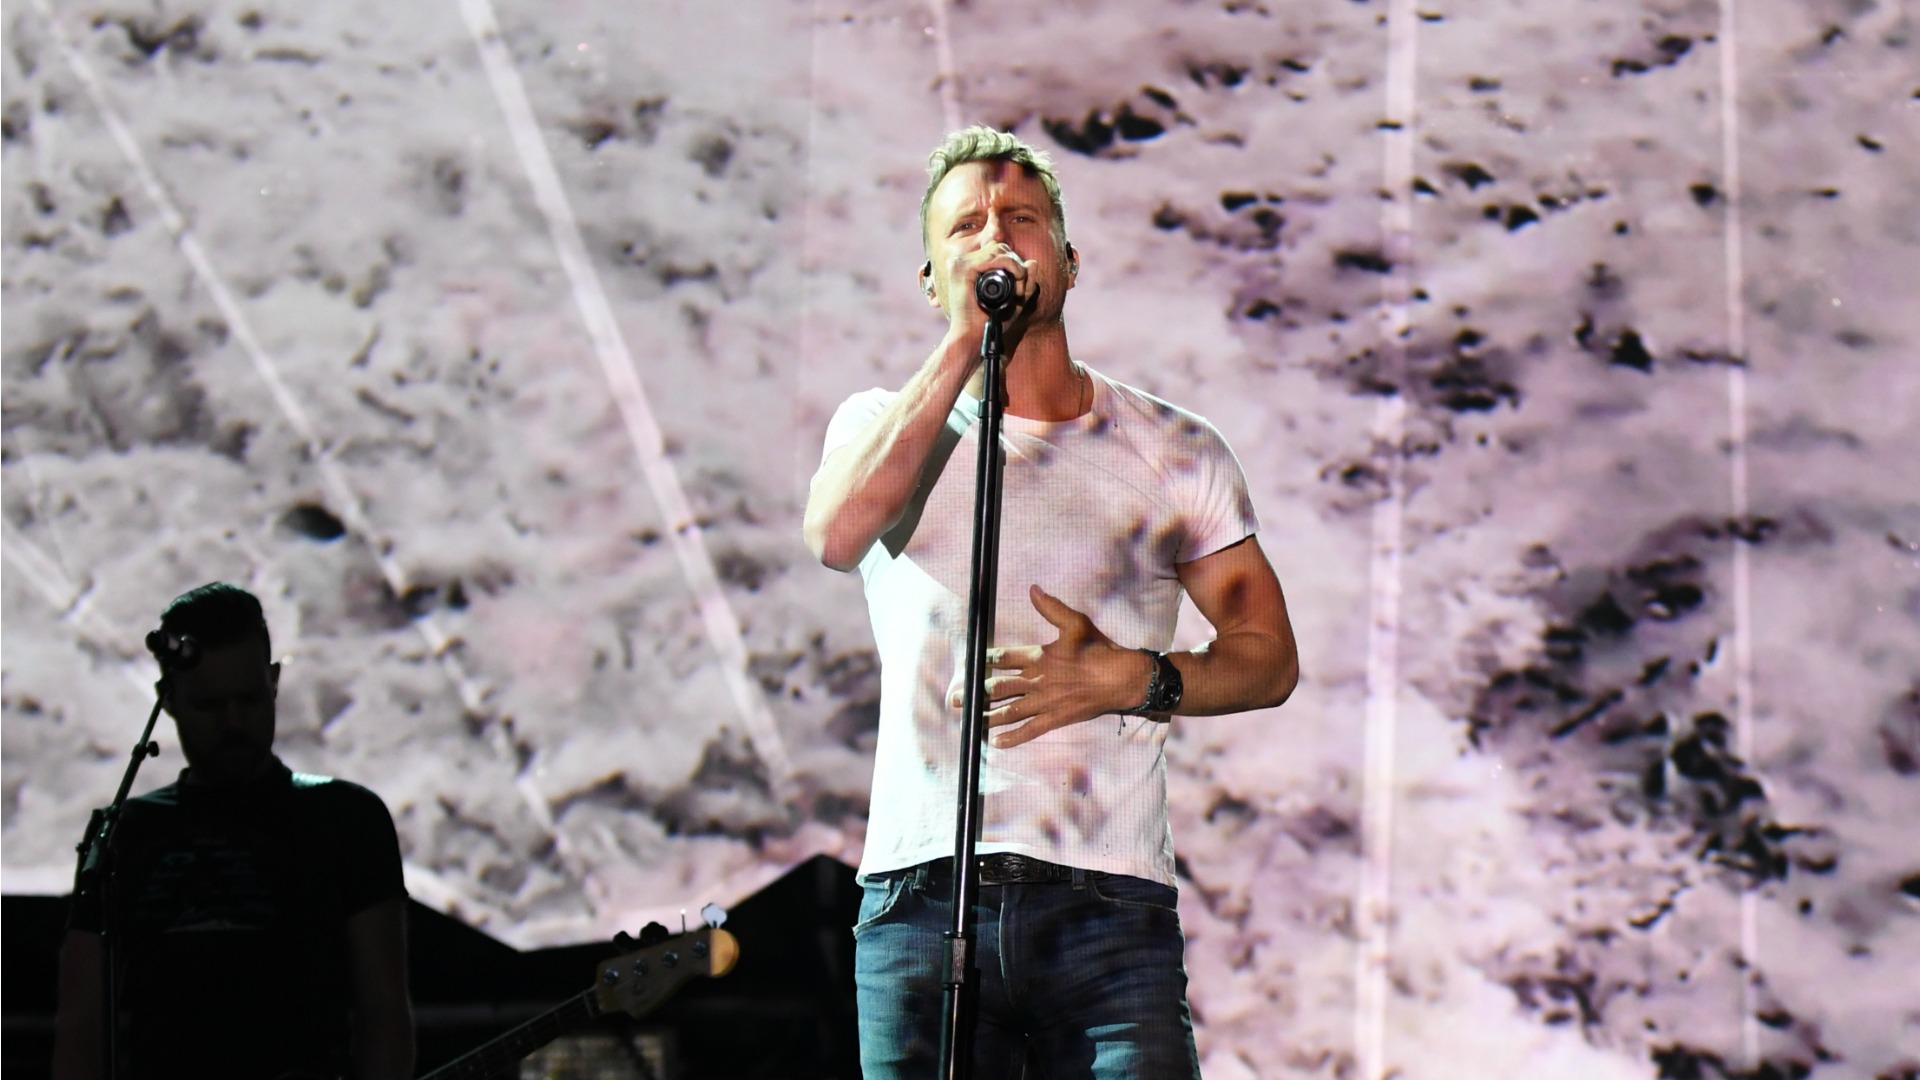 Dierks takes a practice run at his upcoming performance at the 52nd ACM Awards.